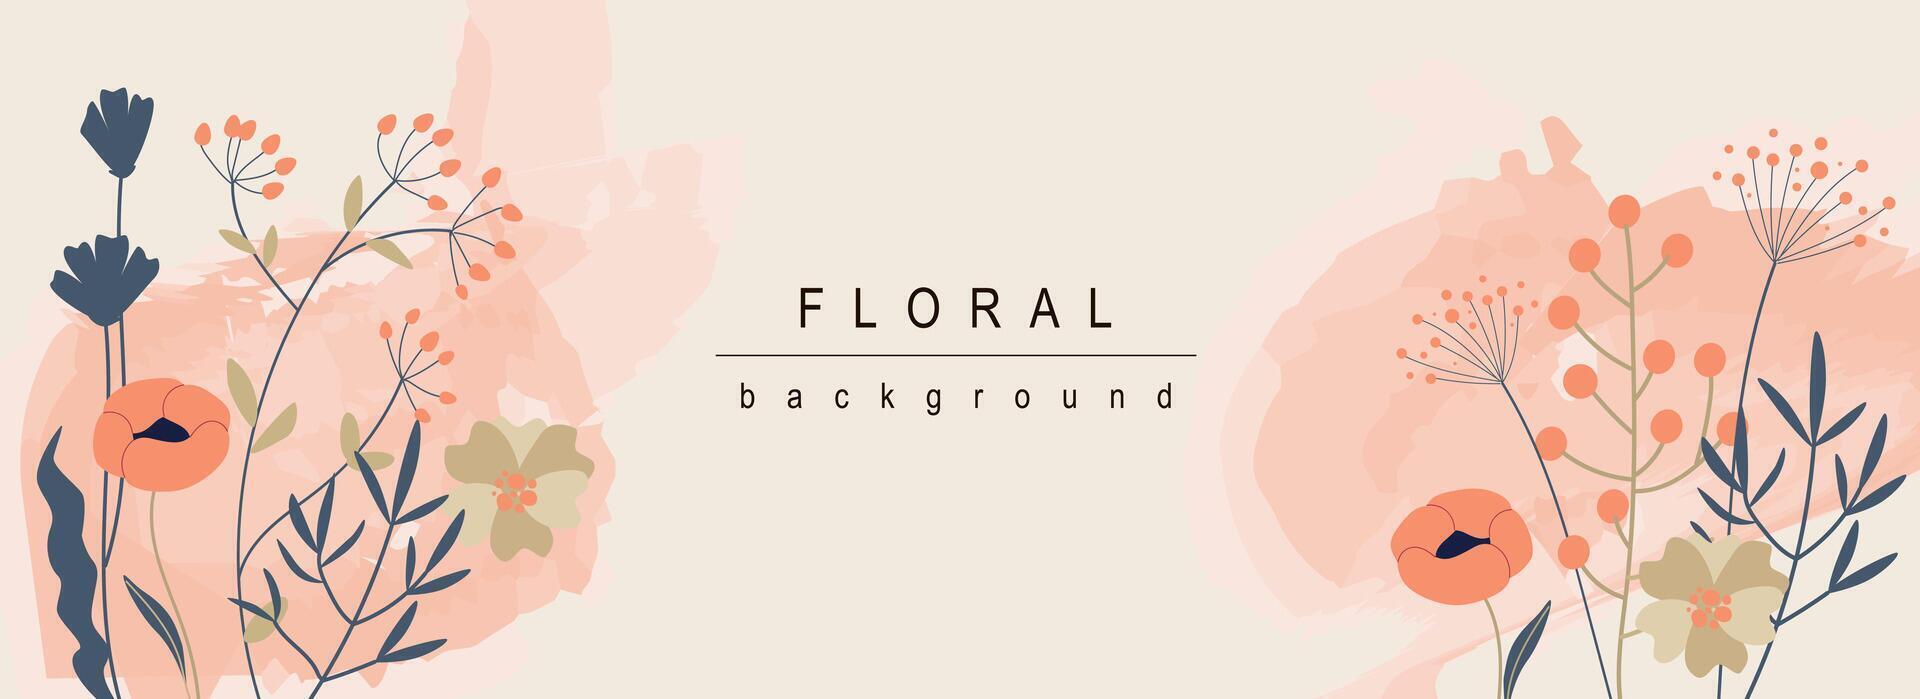 Floral horizontal web banner. Red poppy and wildflowers bouquets with leaves on abstract background. Summer flowers backdrop. Vector illustration for header website, cover templates in modern design